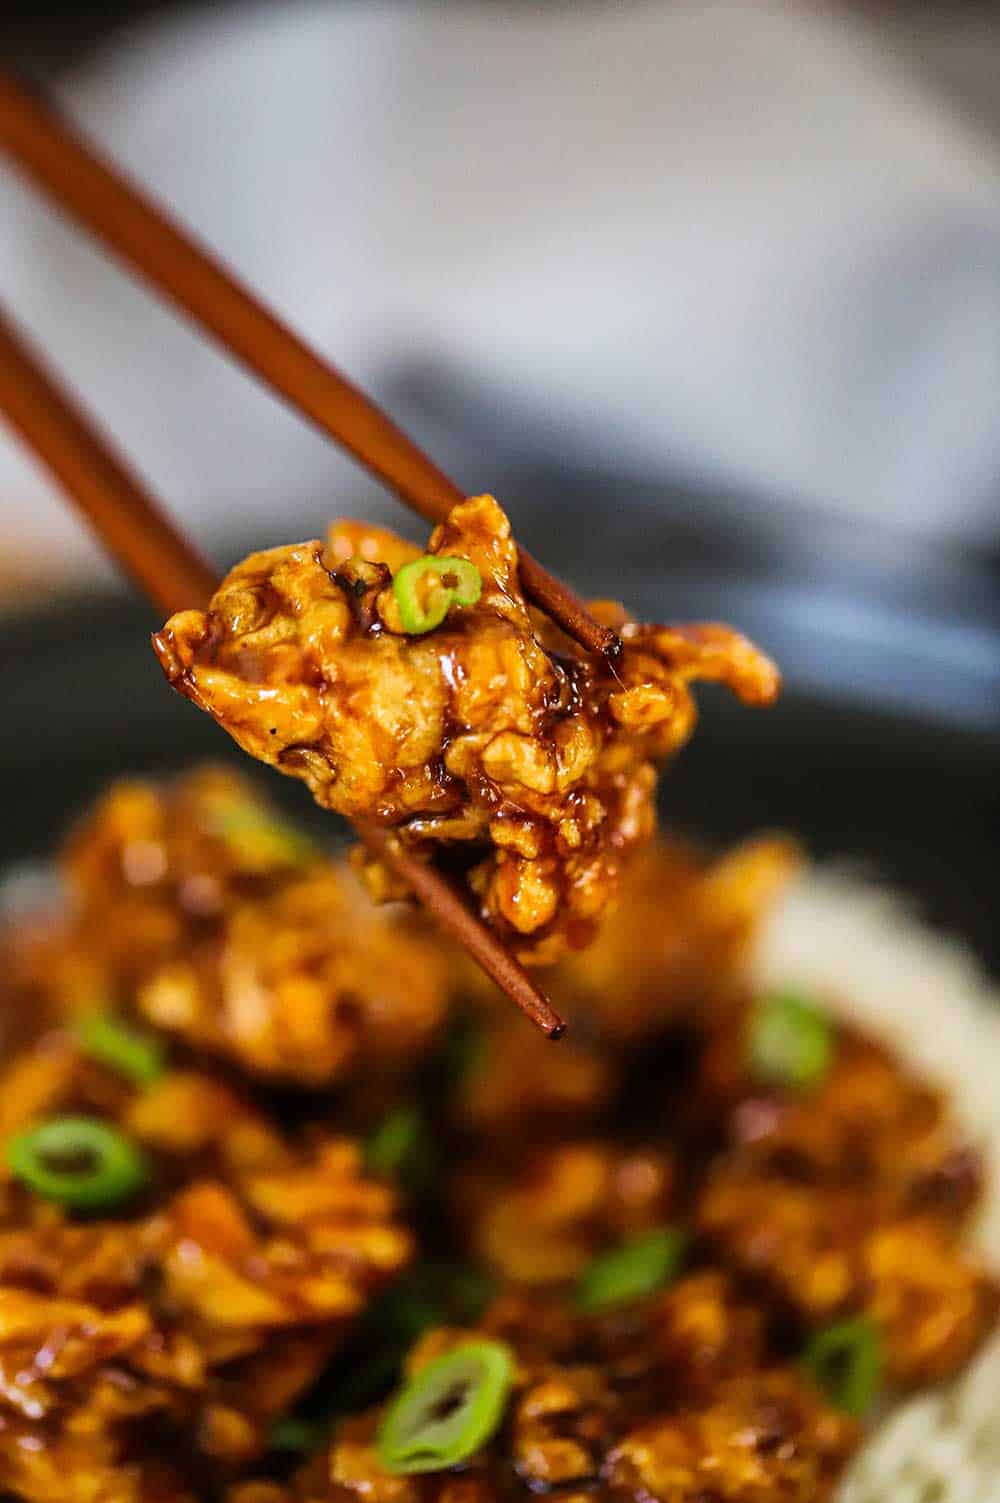 A pair of chopsticks holding up a piece of fried orange chicken over a plate of the same.